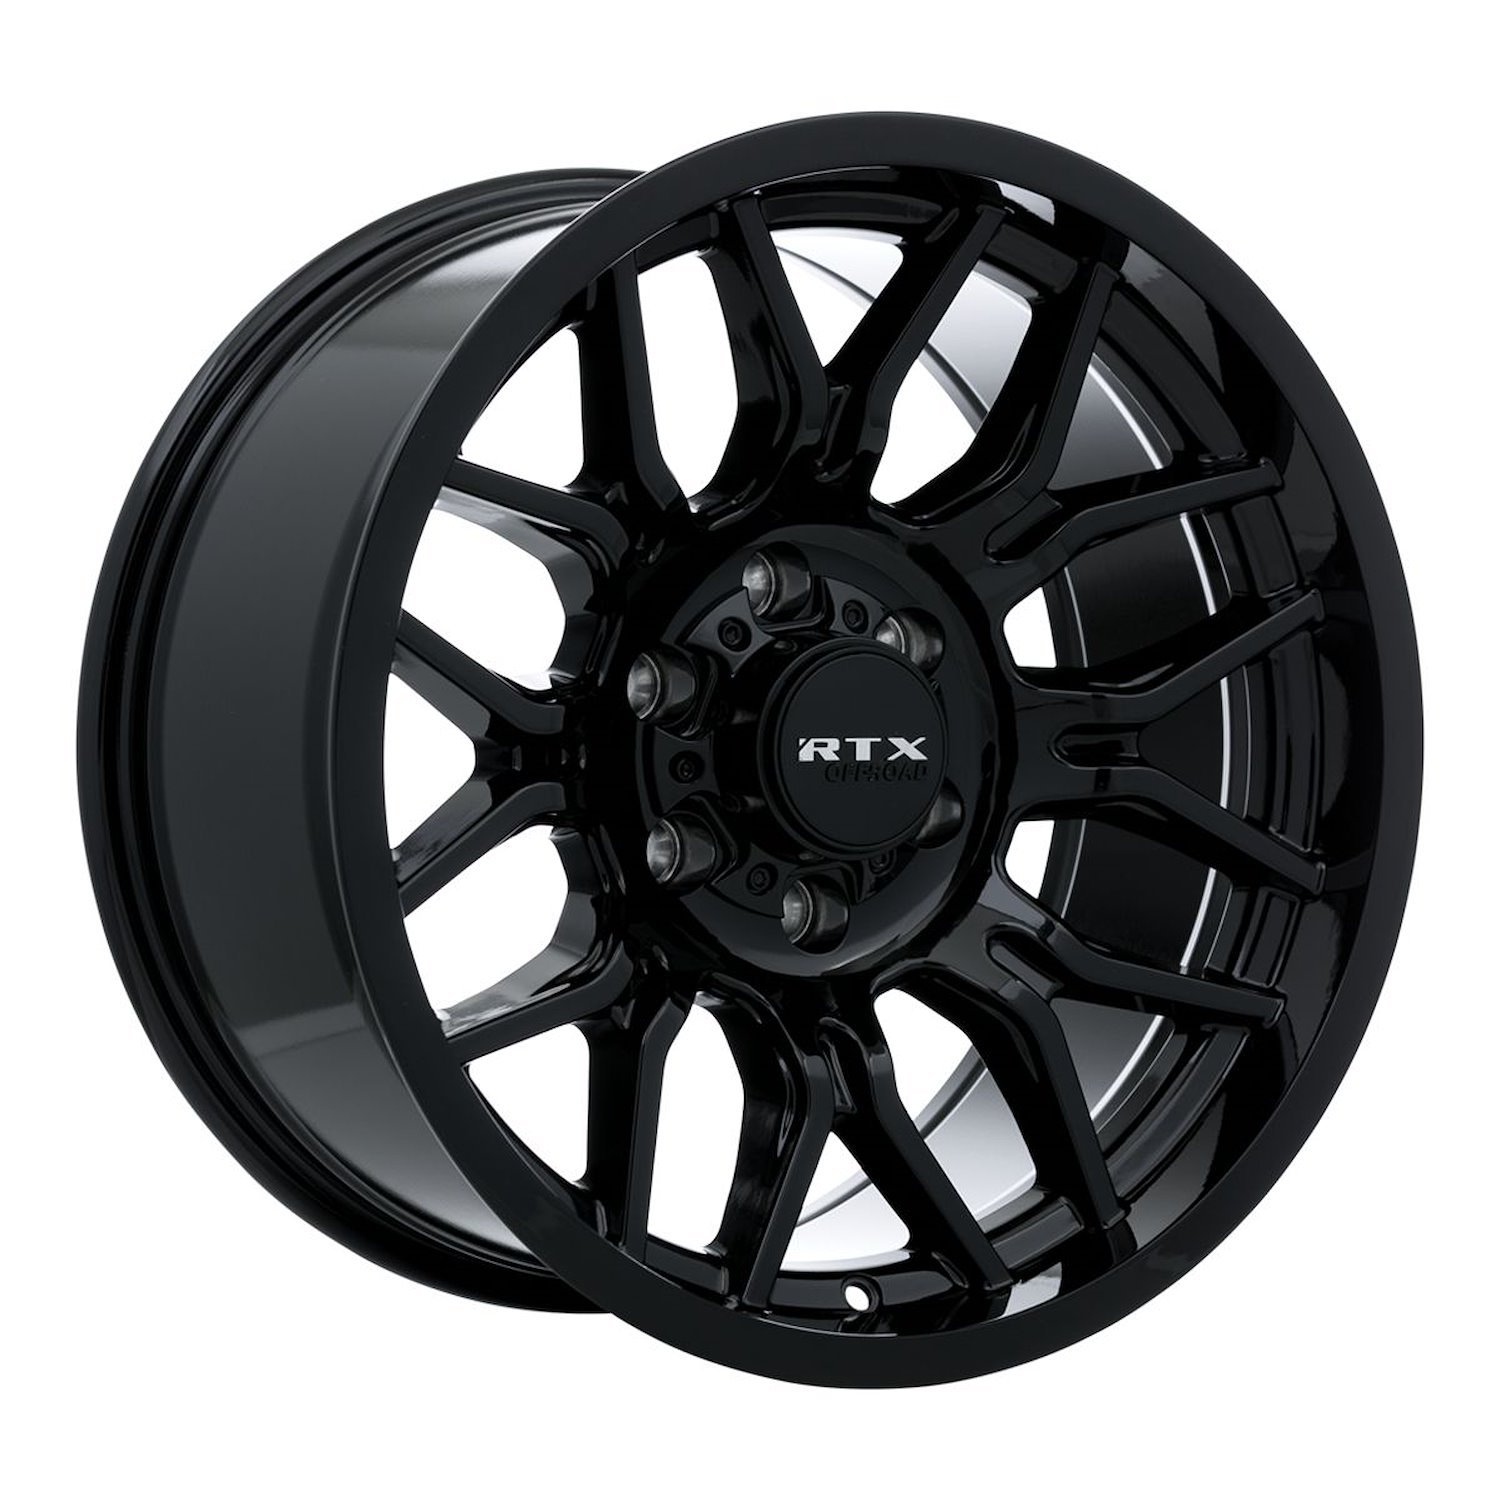 163756 Off-Road Series Claw Wheel [Size: 20" x 9"] Gloss Black Finish